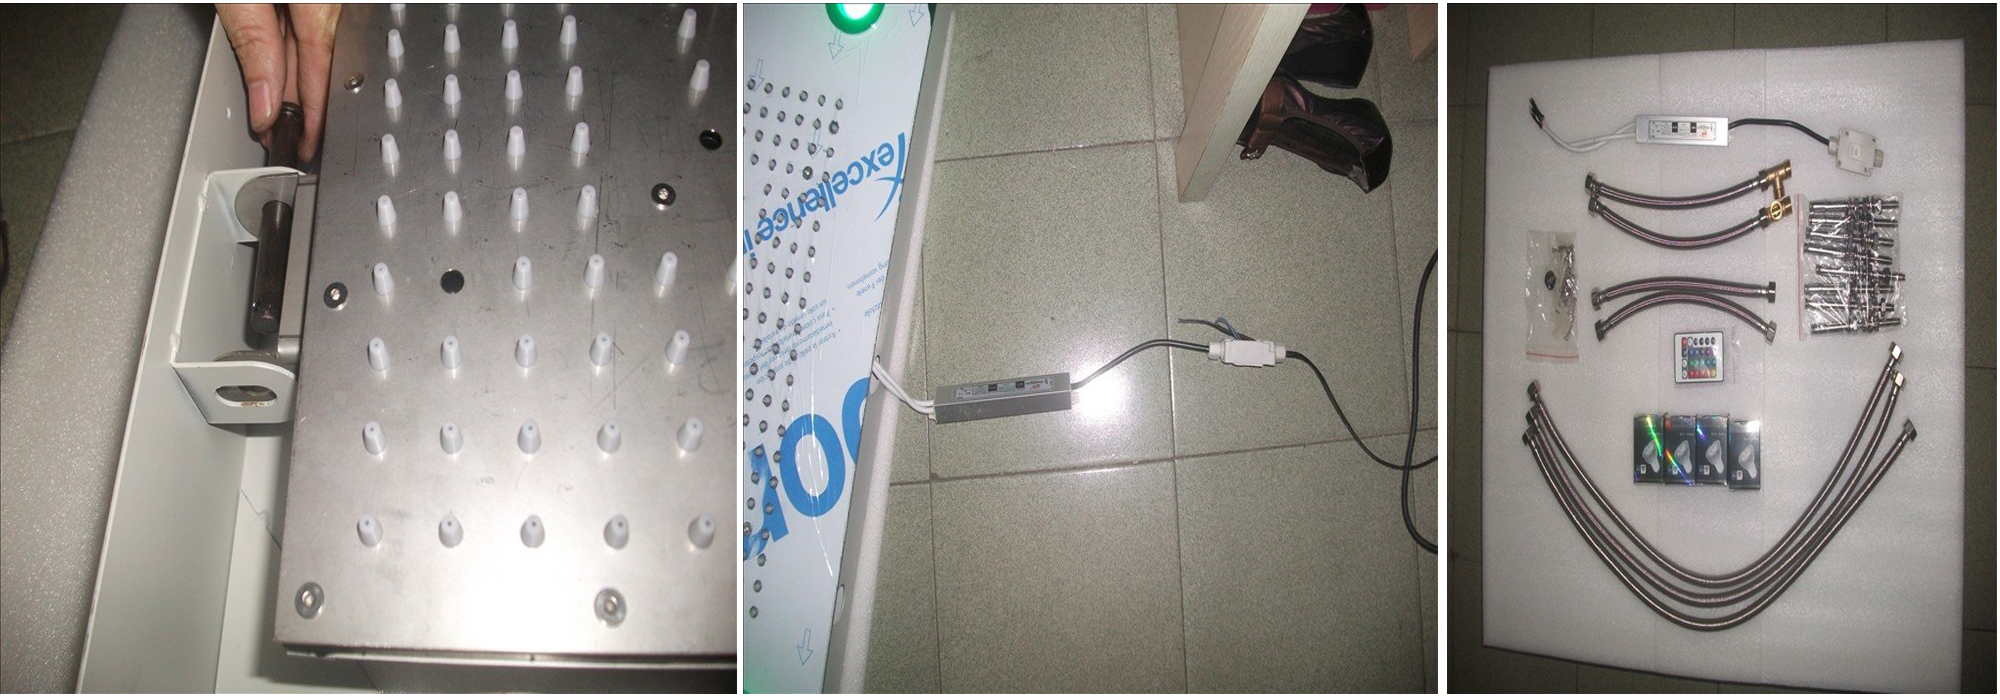 Shower Head Recessed Color Changing Led Installations